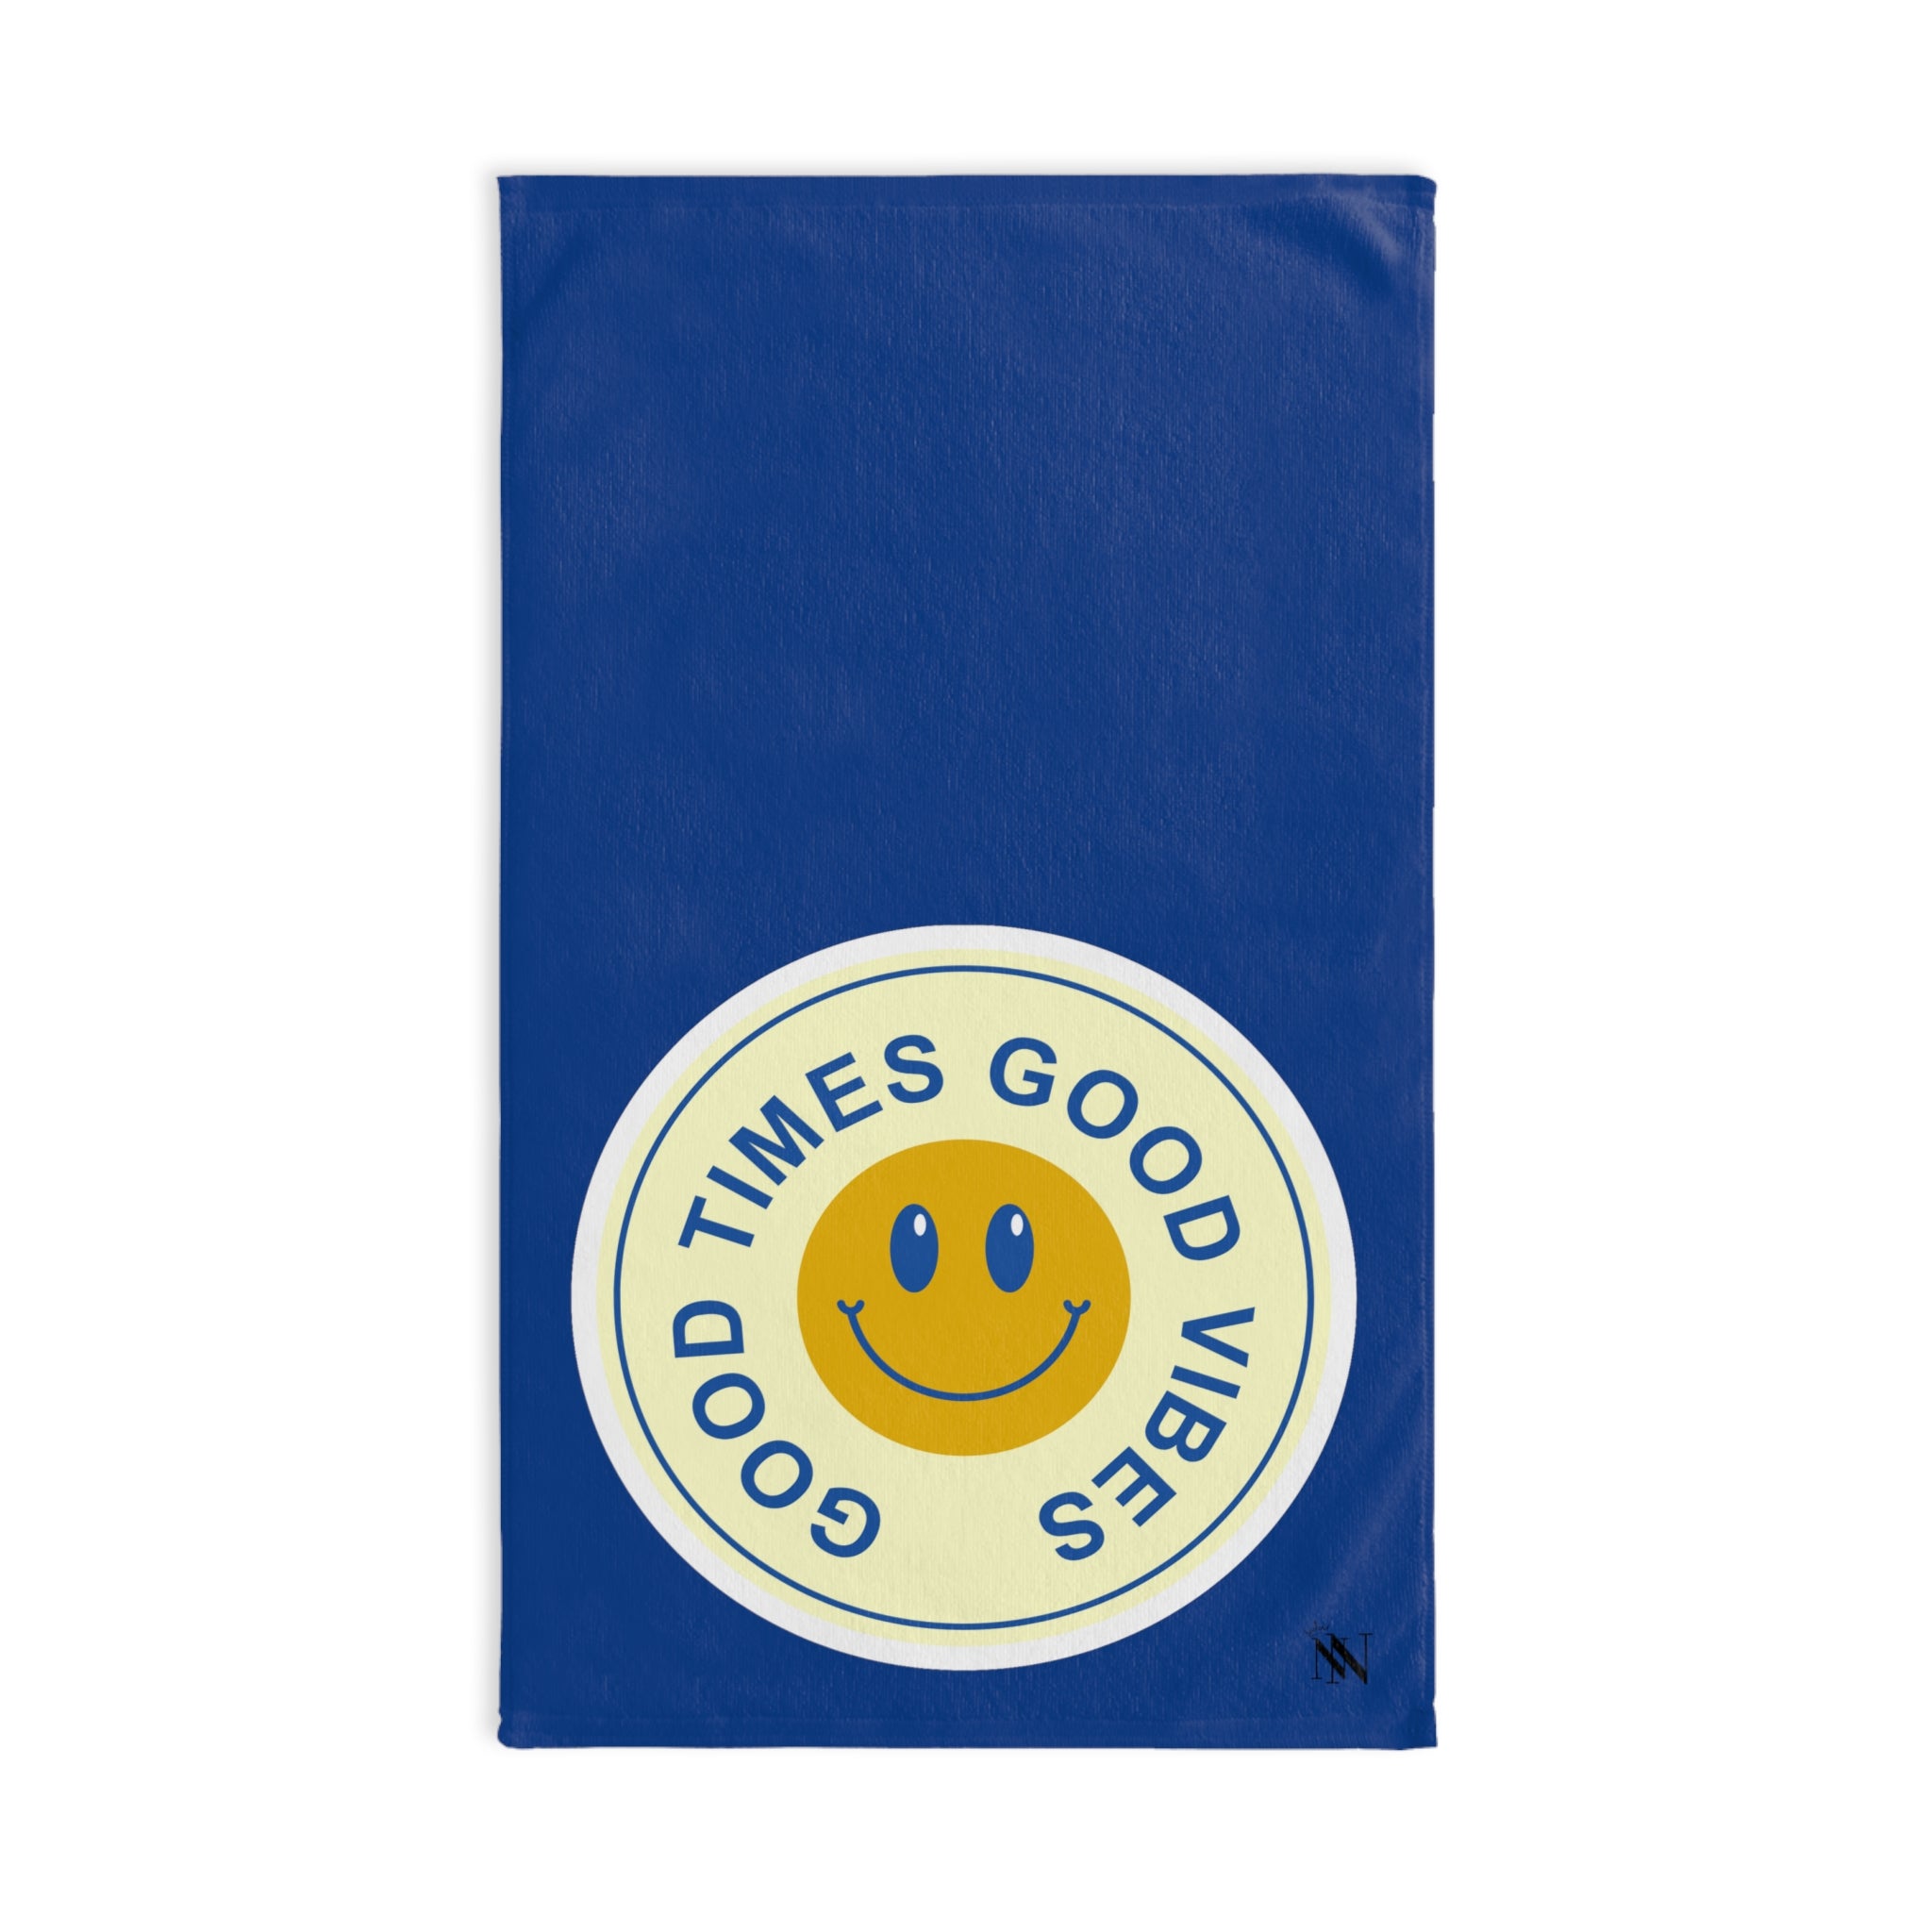 Times Good  Smile Blue | Gifts for Boyfriend, Funny Towel Romantic Gift for Wedding Couple Fiance First Year Anniversary Valentines, Party Gag Gifts, Joke Humor Cloth for Husband Men BF NECTAR NAPKINS